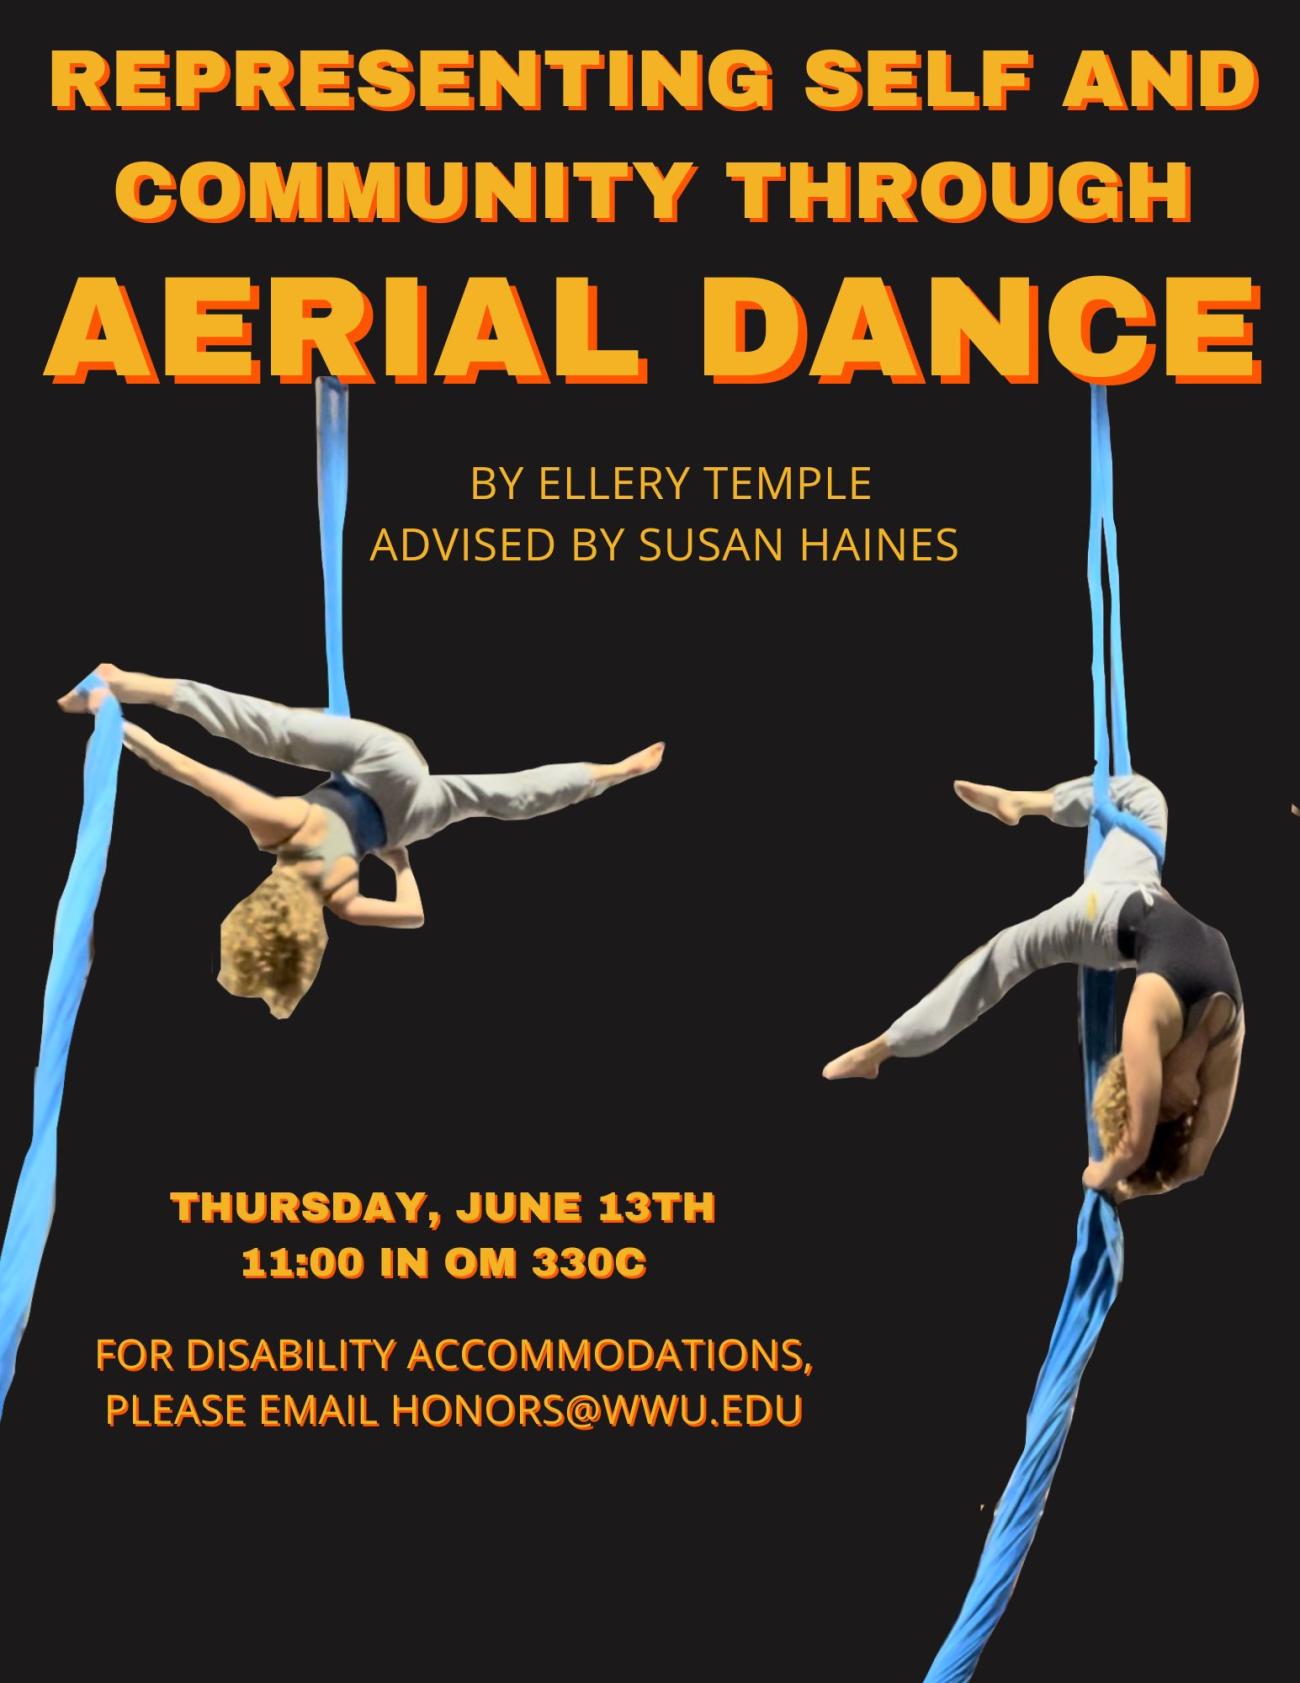 Two photos of a person doing aerial dance on a black background. Orange text reads “Representing Self and Community Through Aerial Dance. By Ellery Temple. Advised by Susan Haines. Thursday, June 13th, 11:00 in OM 330C. For disability accommodations, please email honors@wwu.edu.”